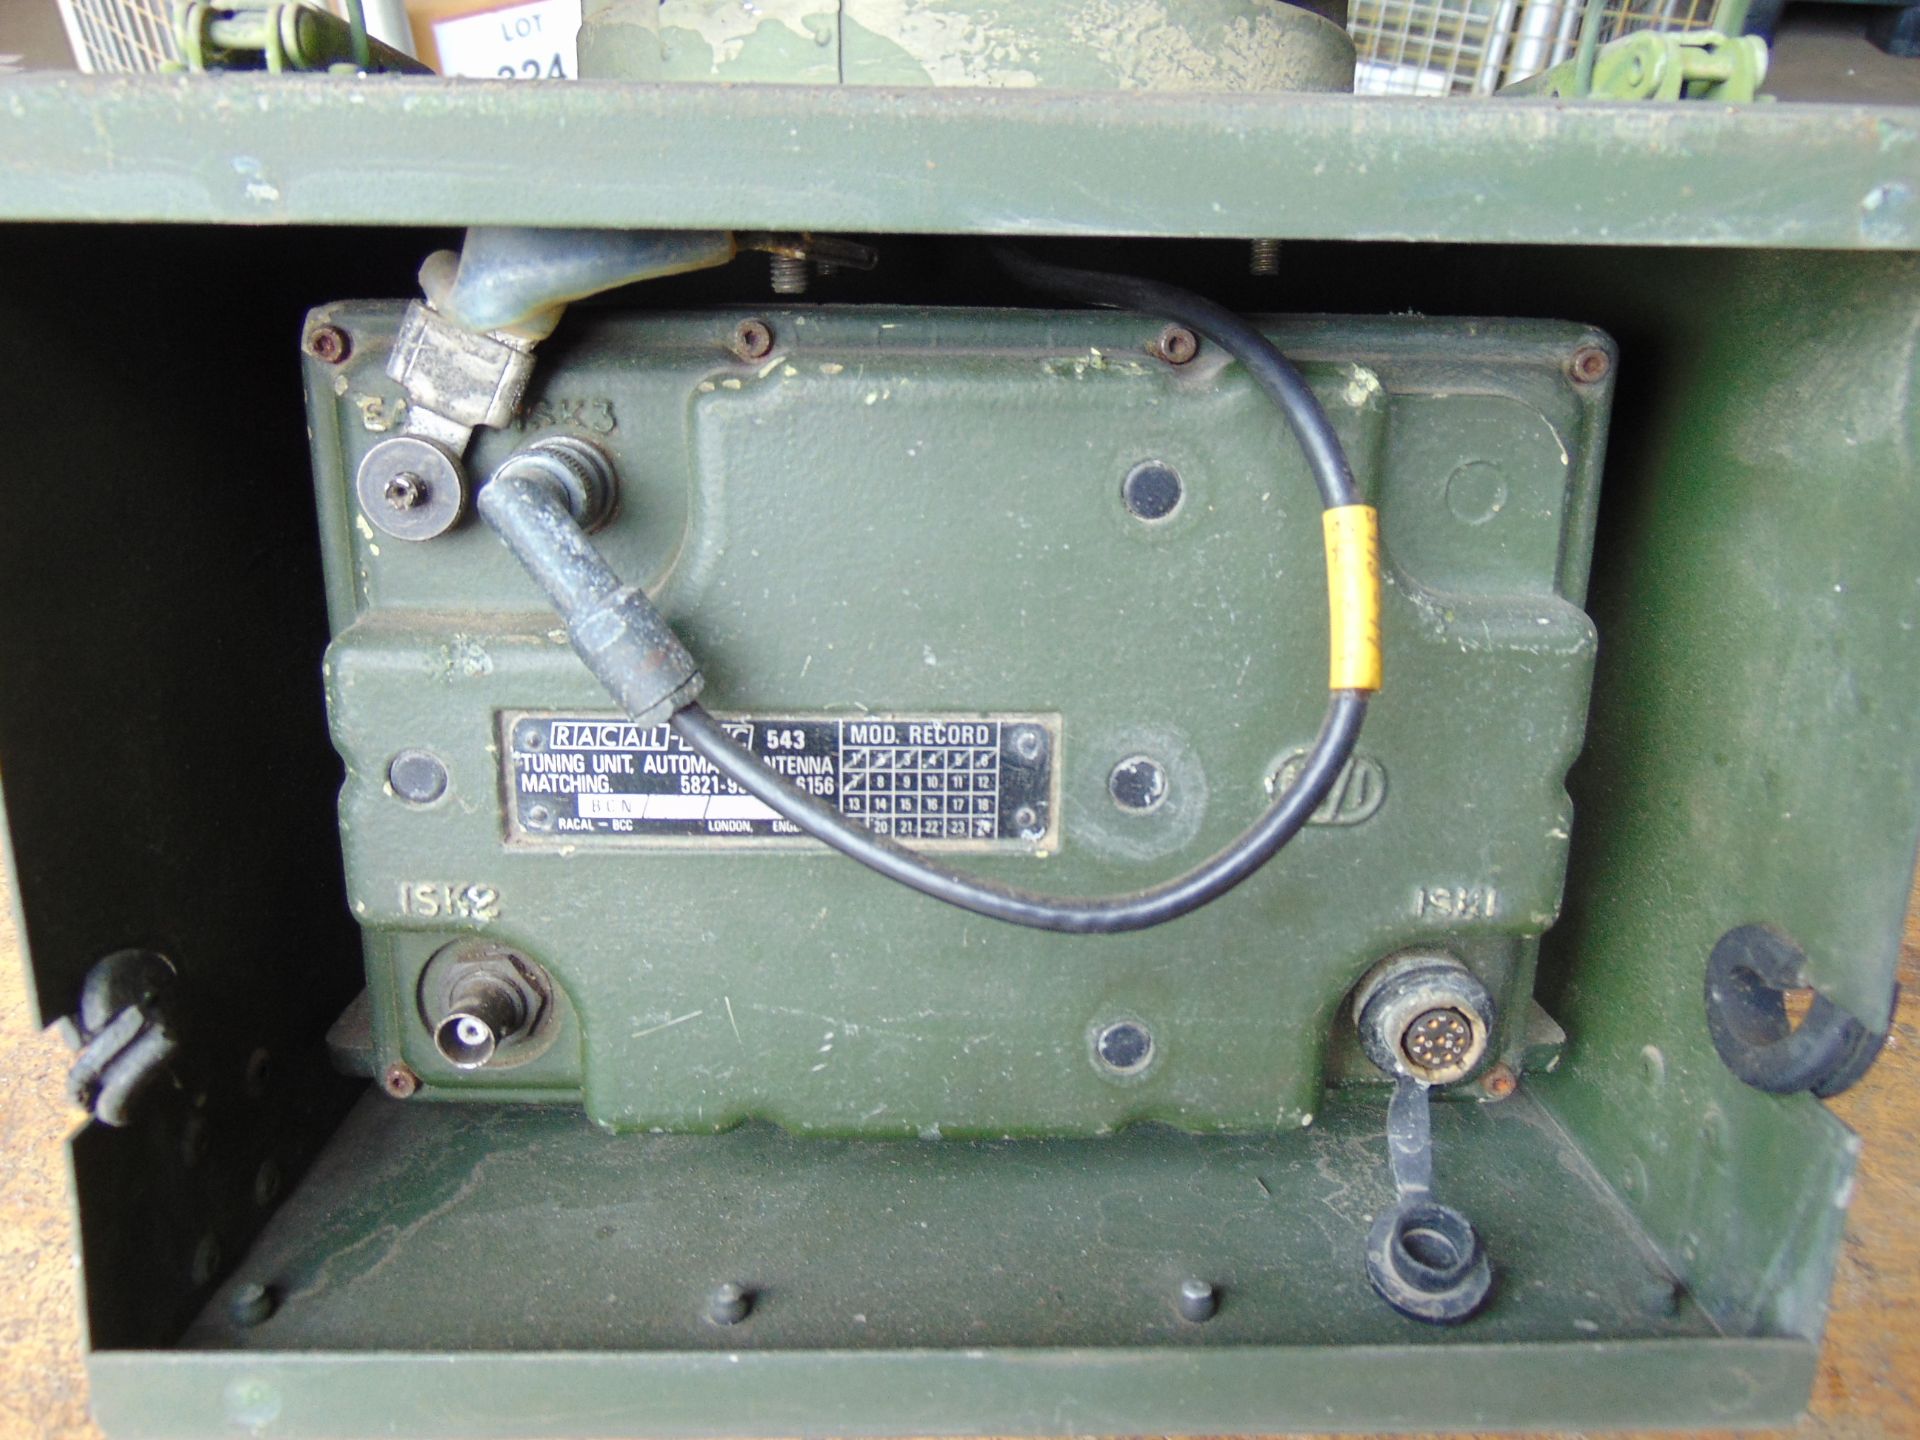 Clansman Land Rover Wing Box c/w Tuner and Antenna Base Getting Hard to Find - Image 5 of 7